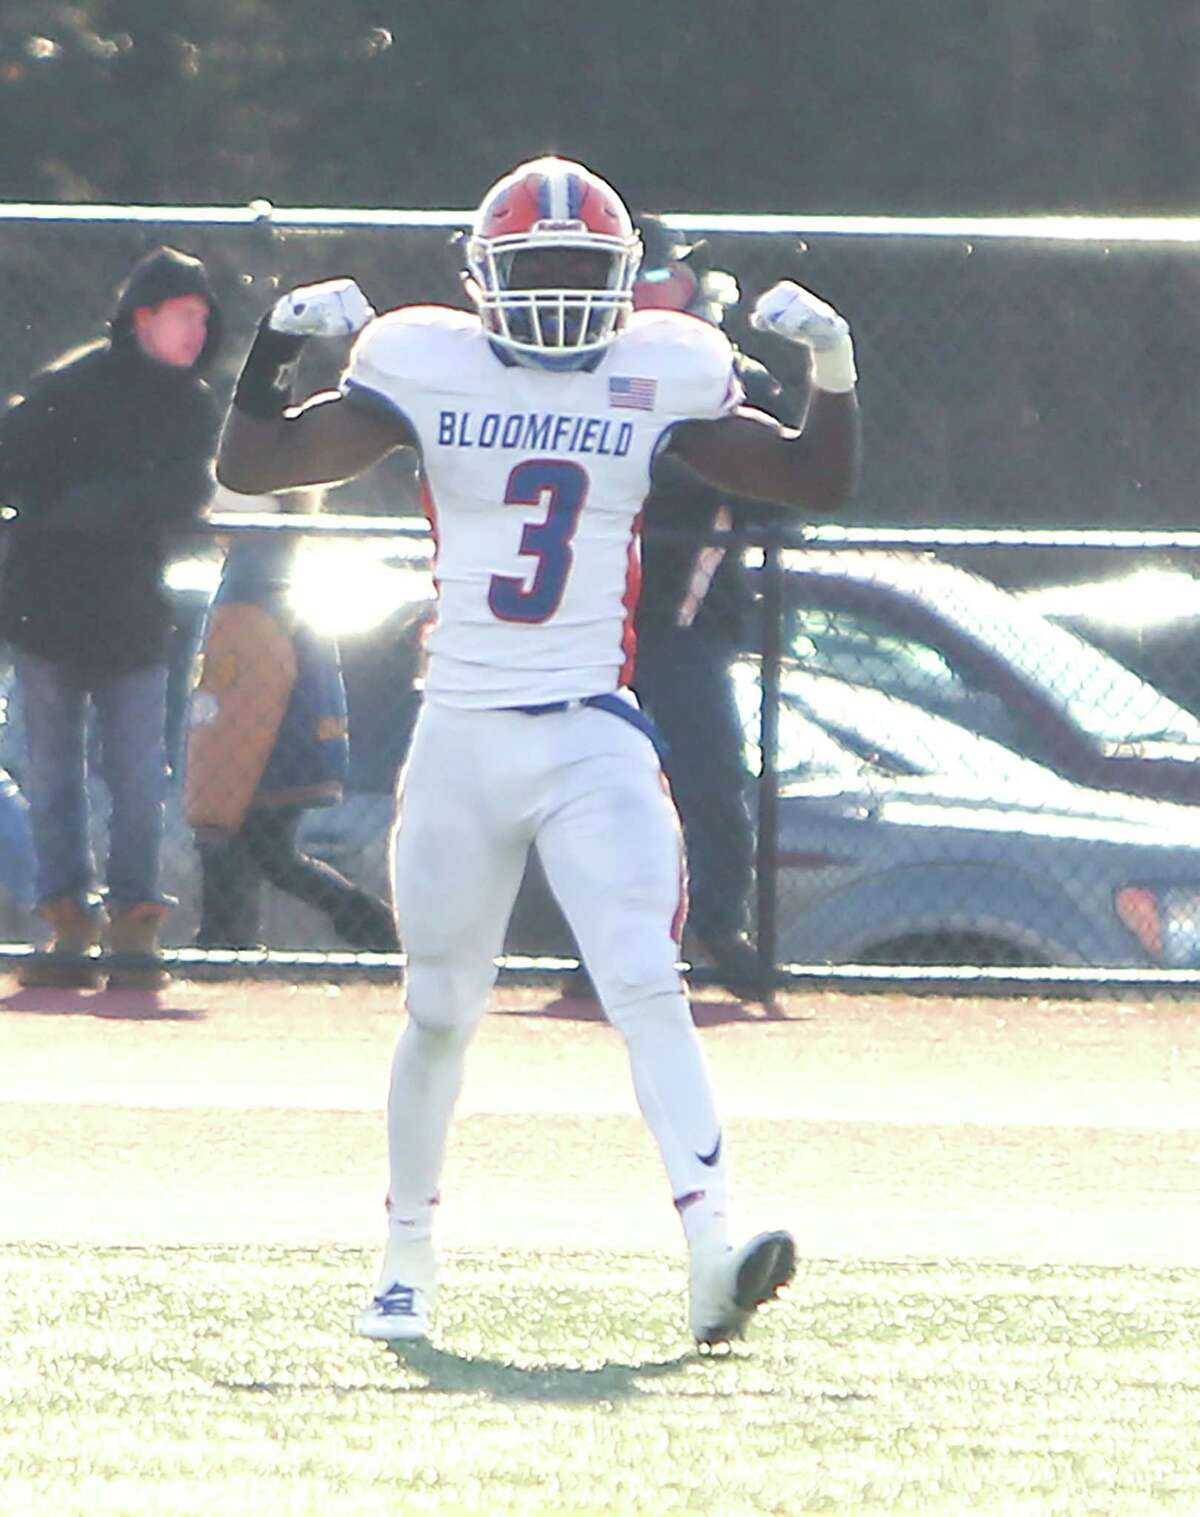 Bloomfield High School’s Anthony Simpson celebrates a touchdown in the end zone during the Class S Championship Game in New Britain against Haddam-Killingworth High School on Saturday, Dec. 8, 2018.